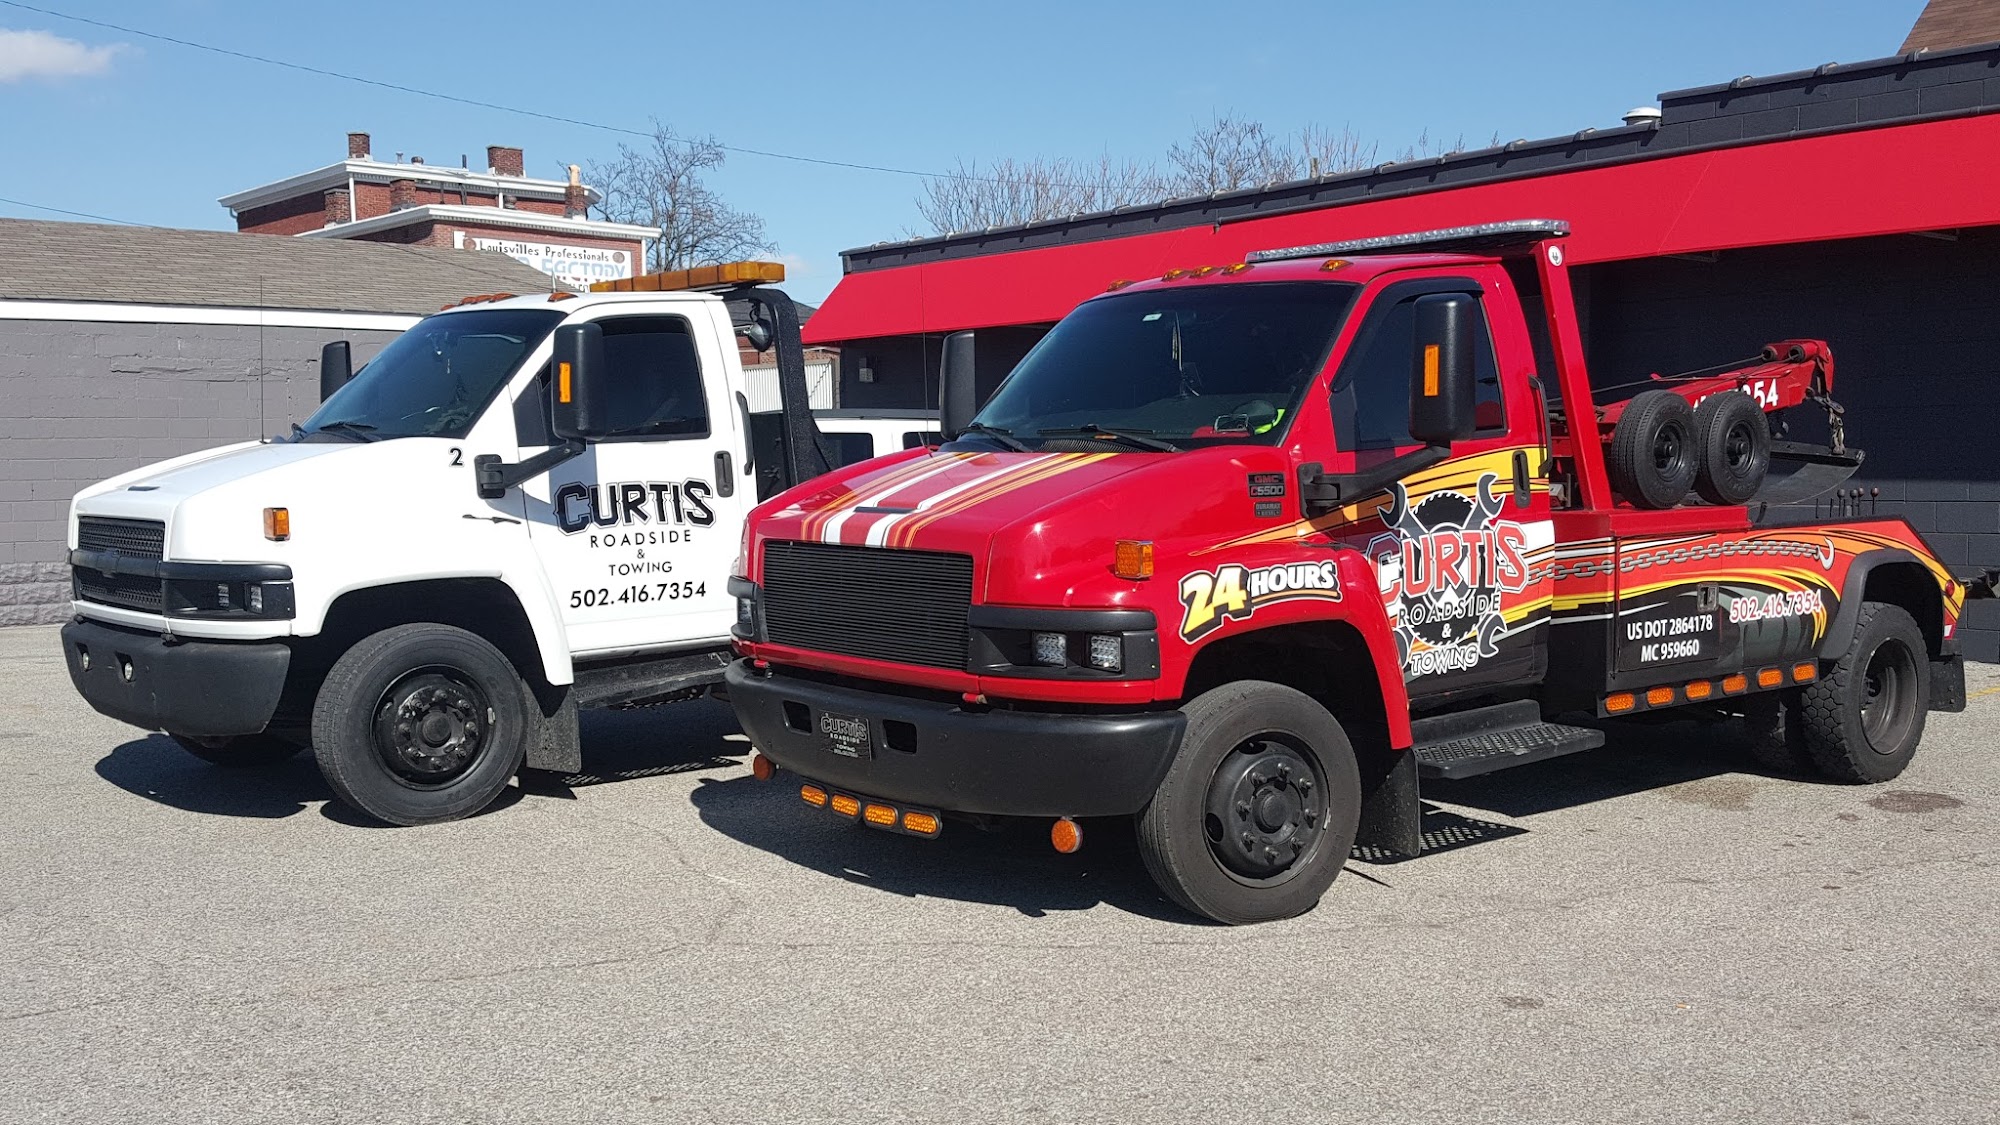 Curtis Roadside & Towing